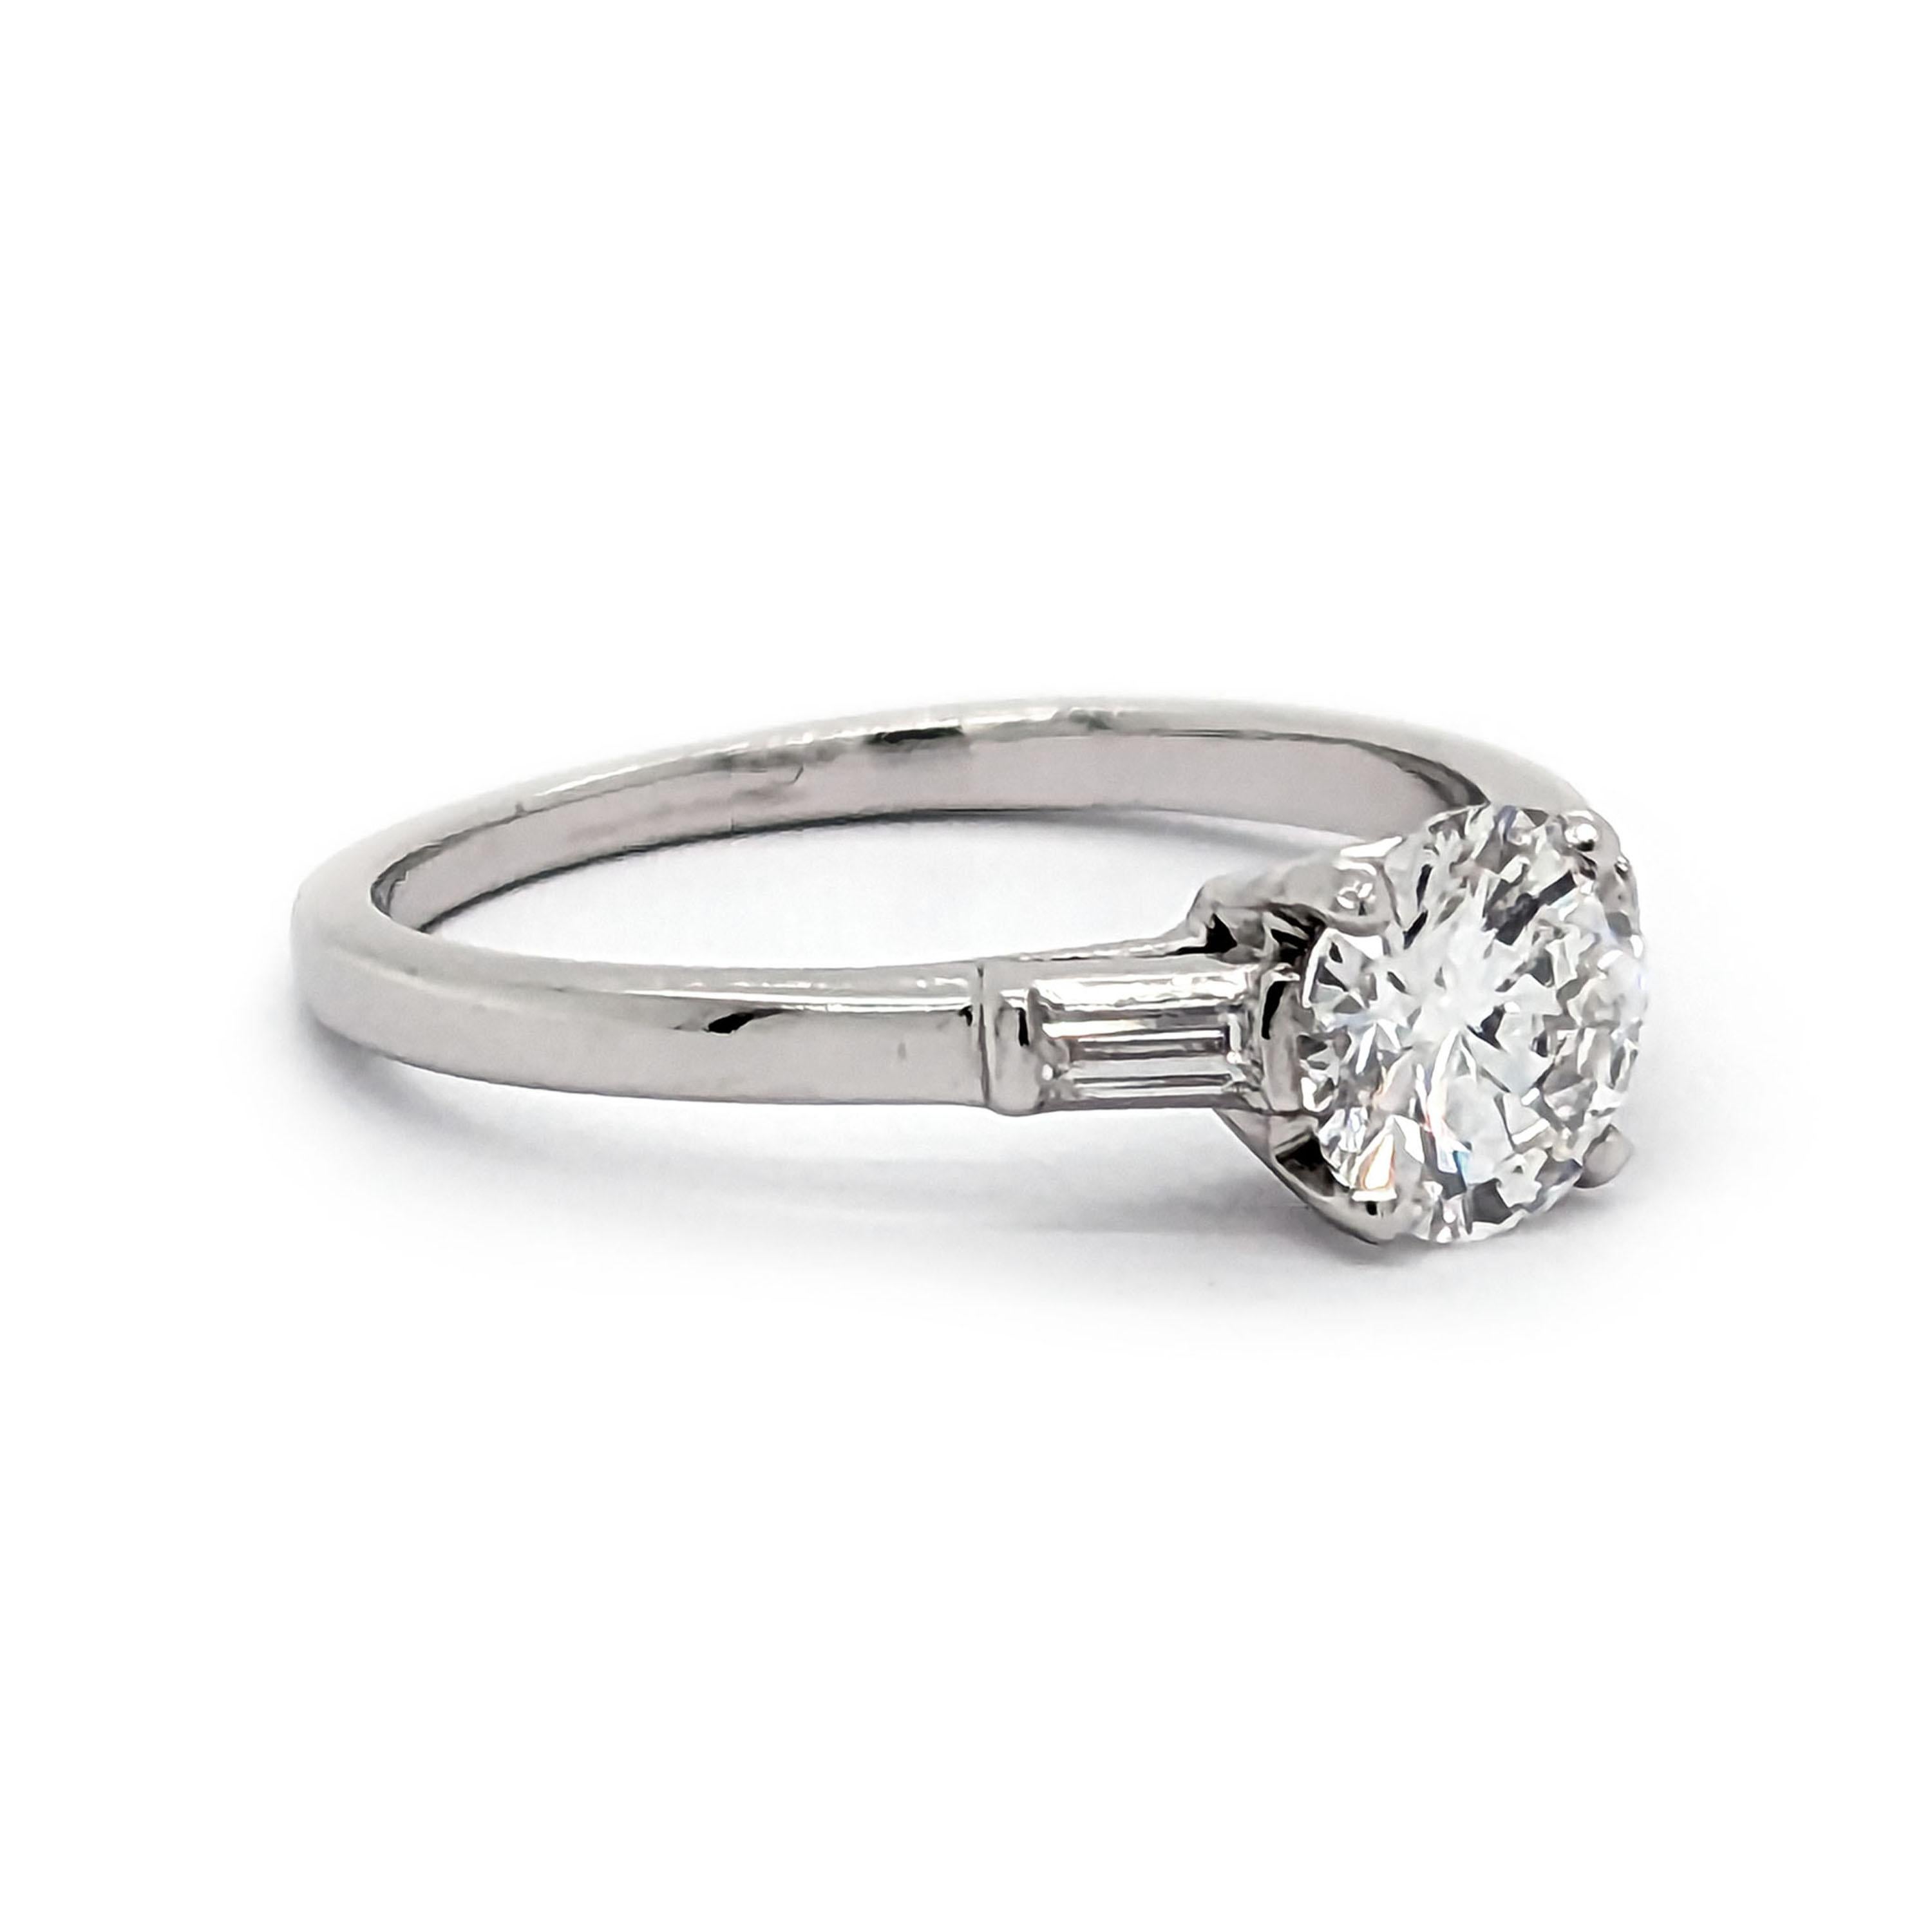 Women's Vintage Solitaire Diamond and Platinum Ring, 0.81 Carats, Circa 1940 For Sale